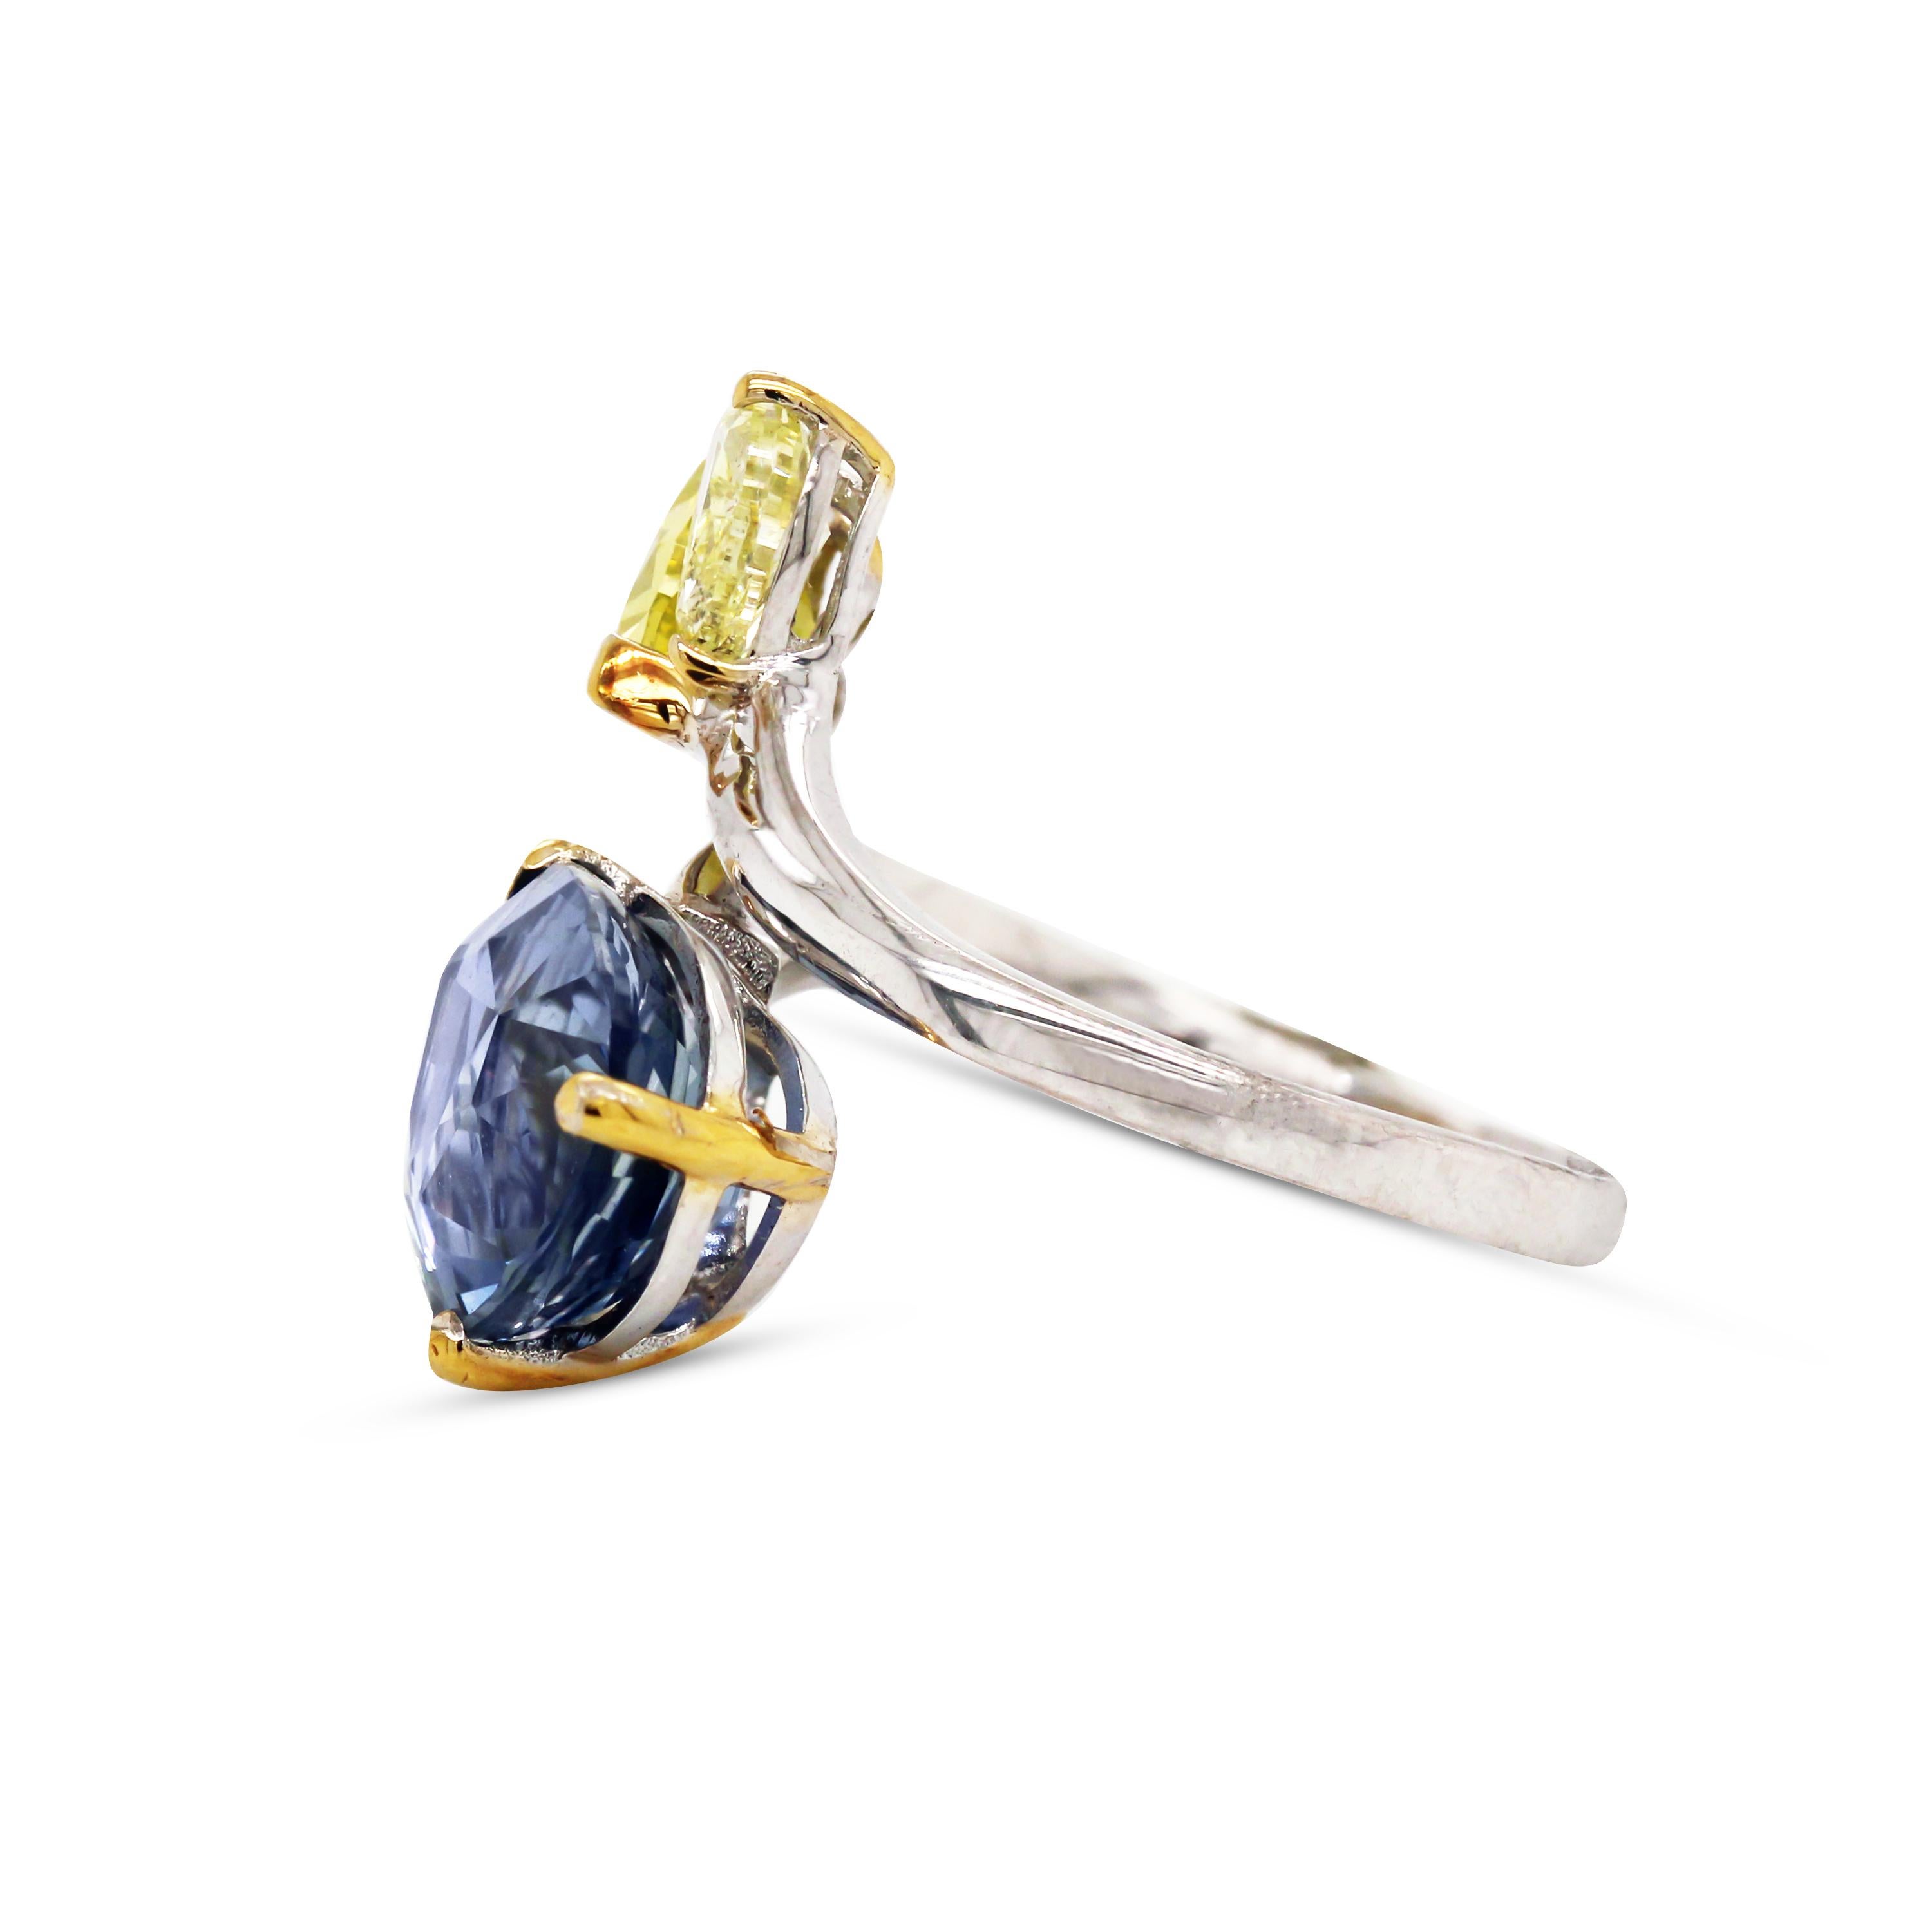 Pear Cut AGL 5.05 Carat Burma Blue Sapphire Fancy Yellow Diamond White Gold Cocktail Ring For Sale